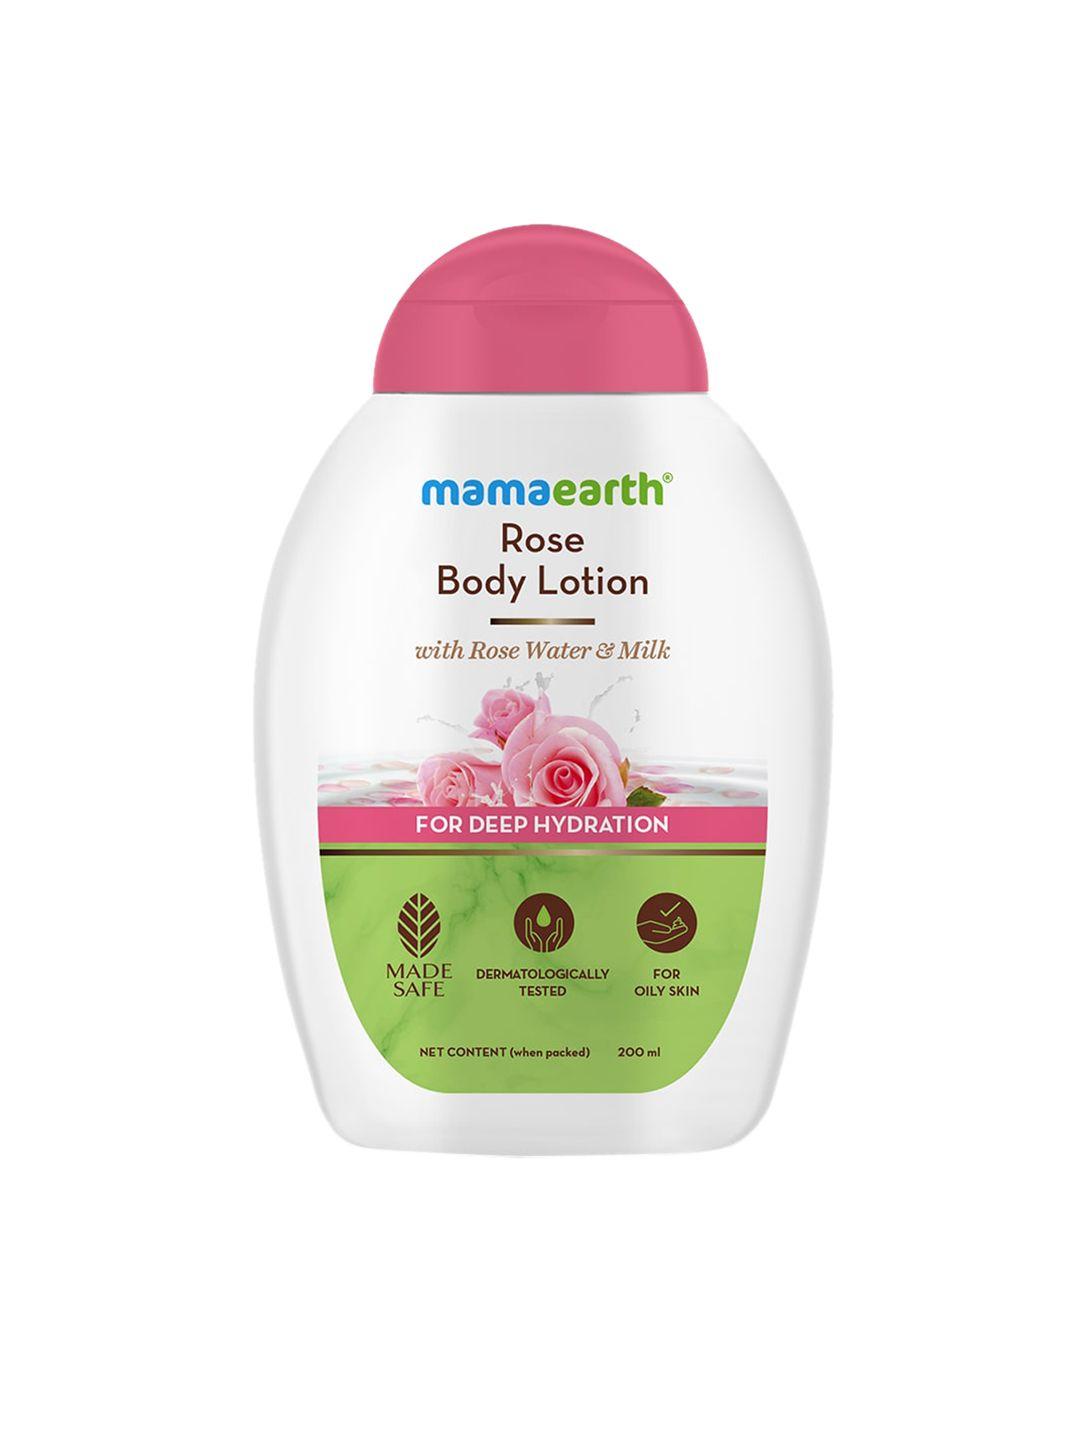 mamaearth rose body lotion with rose water & milk - 200 ml